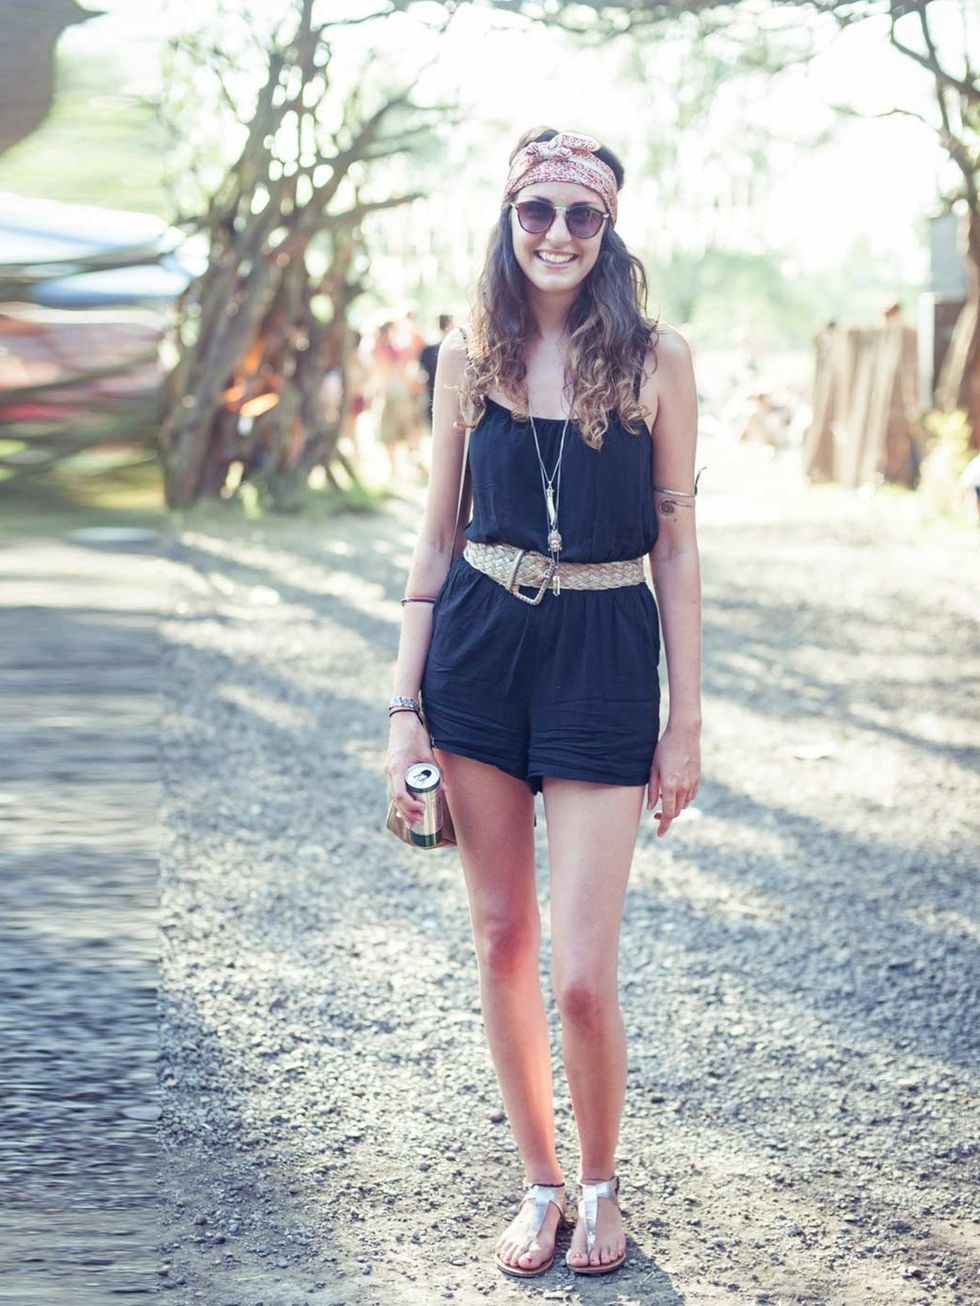 <p>Daisy McLeod wears Topshop playsuit, Next sandals, Mink Pink sunglasses, Topshop necklace, Great grandmother's headscarf and bag with vintage belt.</p>